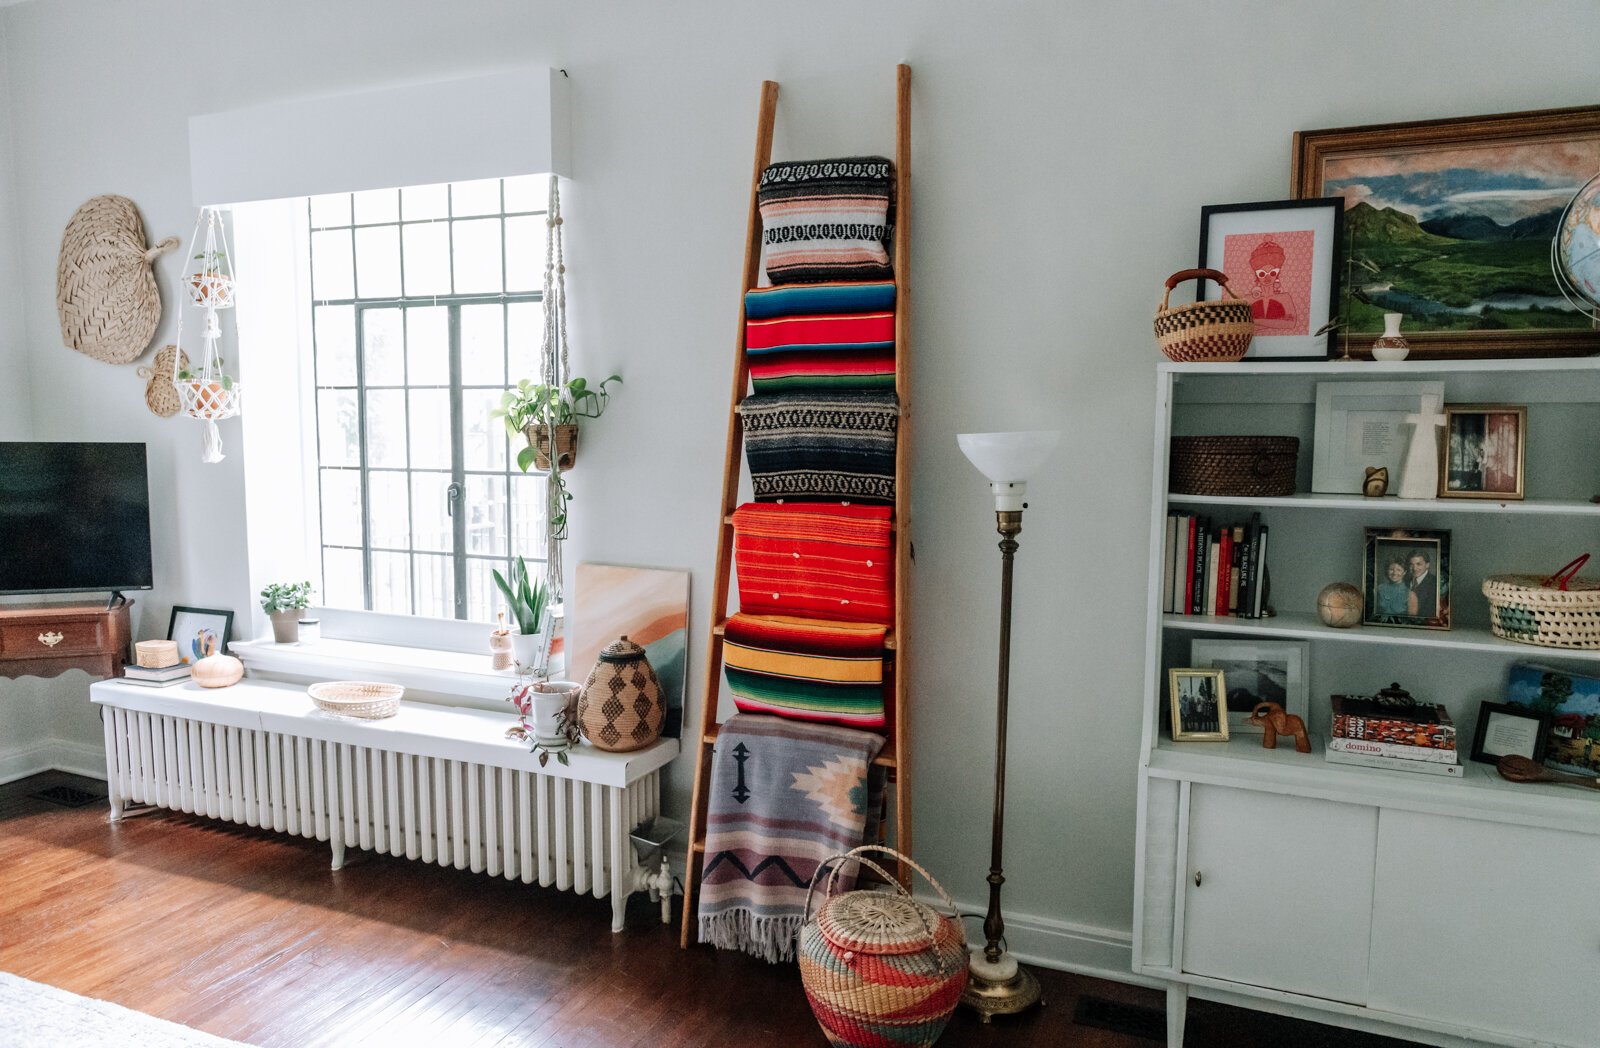 The blanket ladder is one of her favorite items in the apartment of Jamie Curtis on Edgewater Ave. in the Lakeside Park neighborhood.